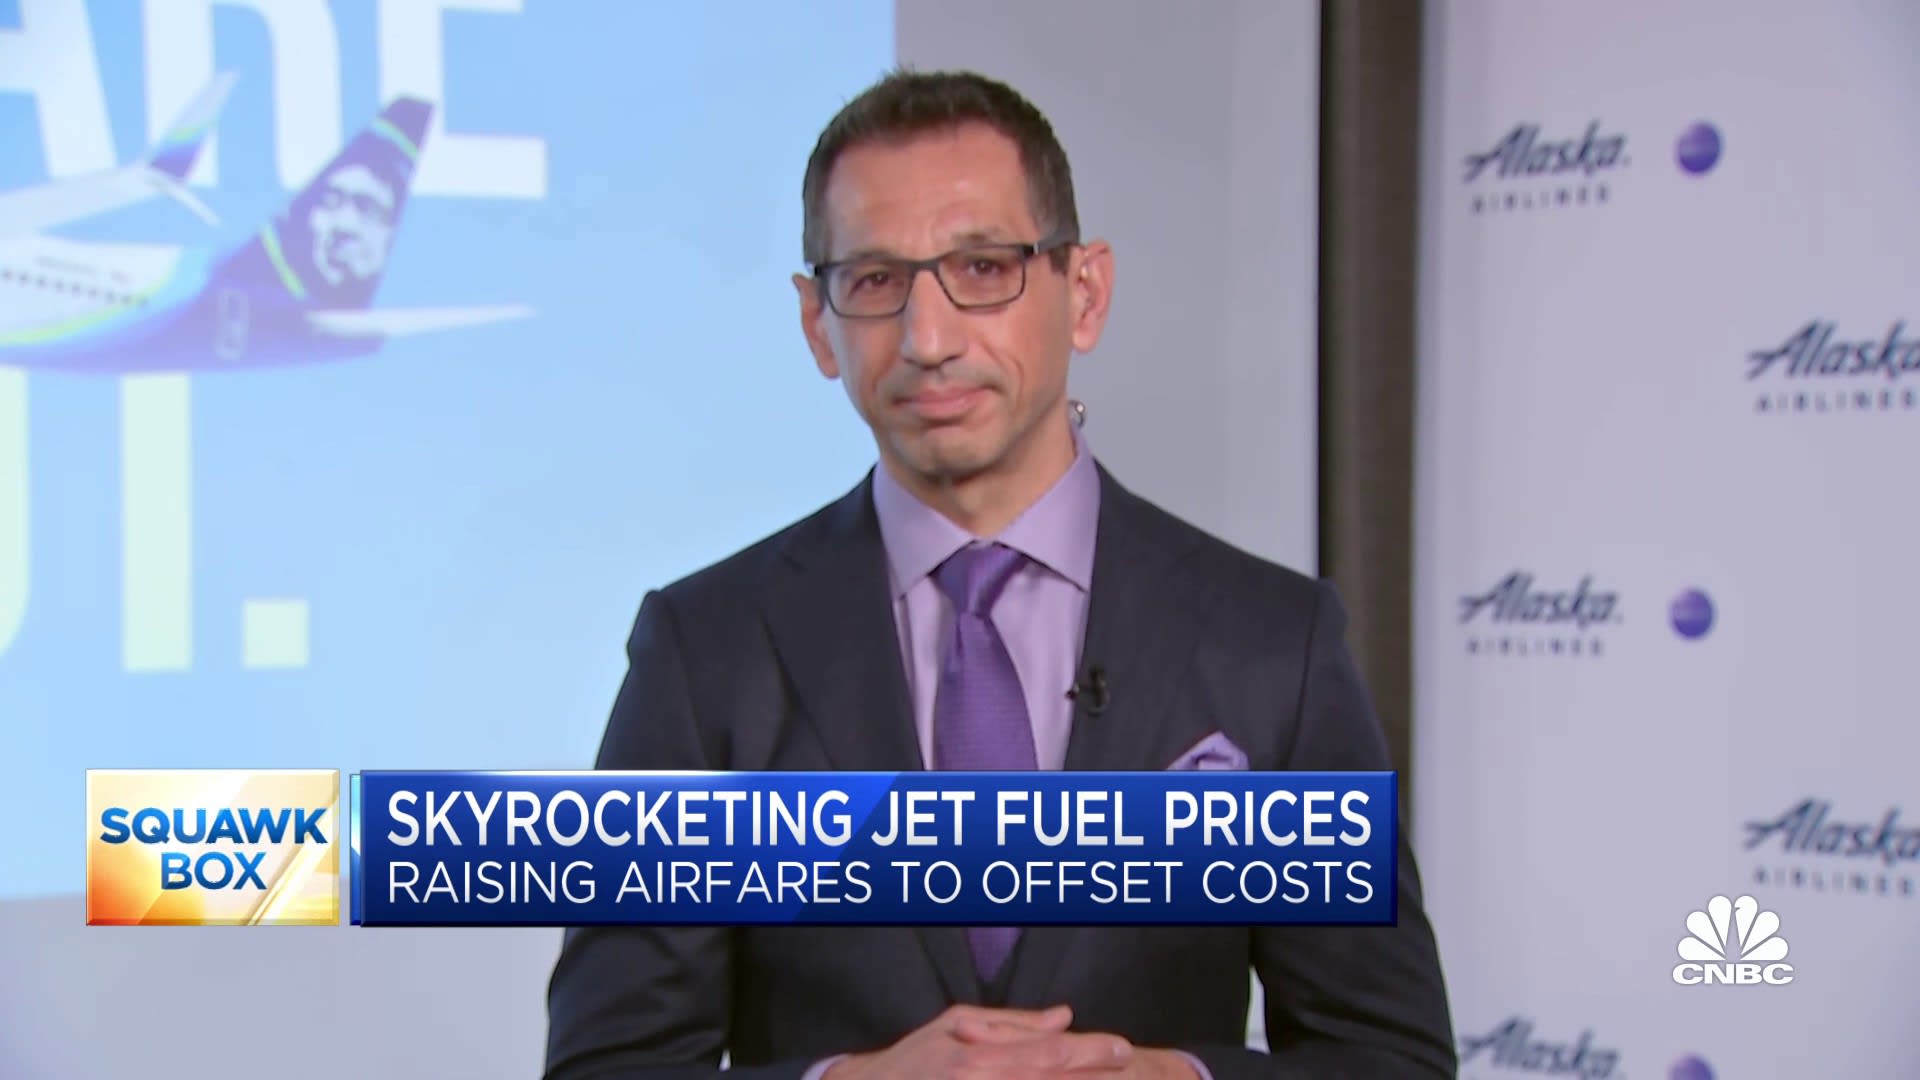 Watch CNBC’s full interview with Alaska Airlines CEO Ben Minicucci